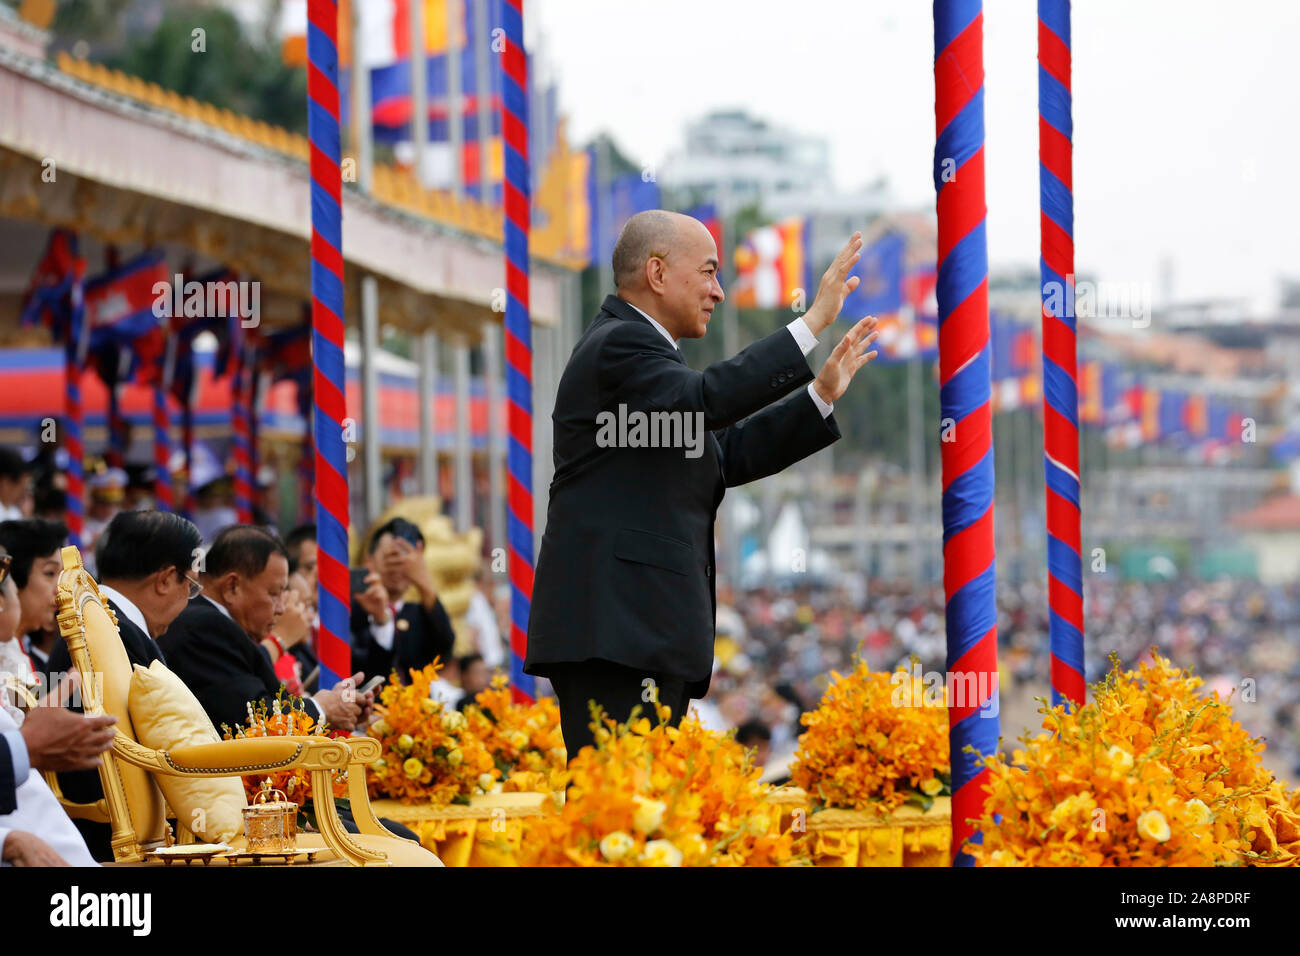 Phnom Penh, Cambodia. 10th Nov, 2019. Cambodian King Norodom Sihamoni waves at boat racers during the Water Festival in Phnom Penh, Cambodia, Nov. 10, 2019. Tens of thousands of spectators flocked to the riverside here on Sunday for an 838-year-old boat racing tradition, which is held to celebrate the annual Water Festival. TO GO WITH "Feature: Tens of thousands cheer for centuries-old boat race in Cambodian capital" Credit: Sovannara/Xinhua/Alamy Live News Stock Photo